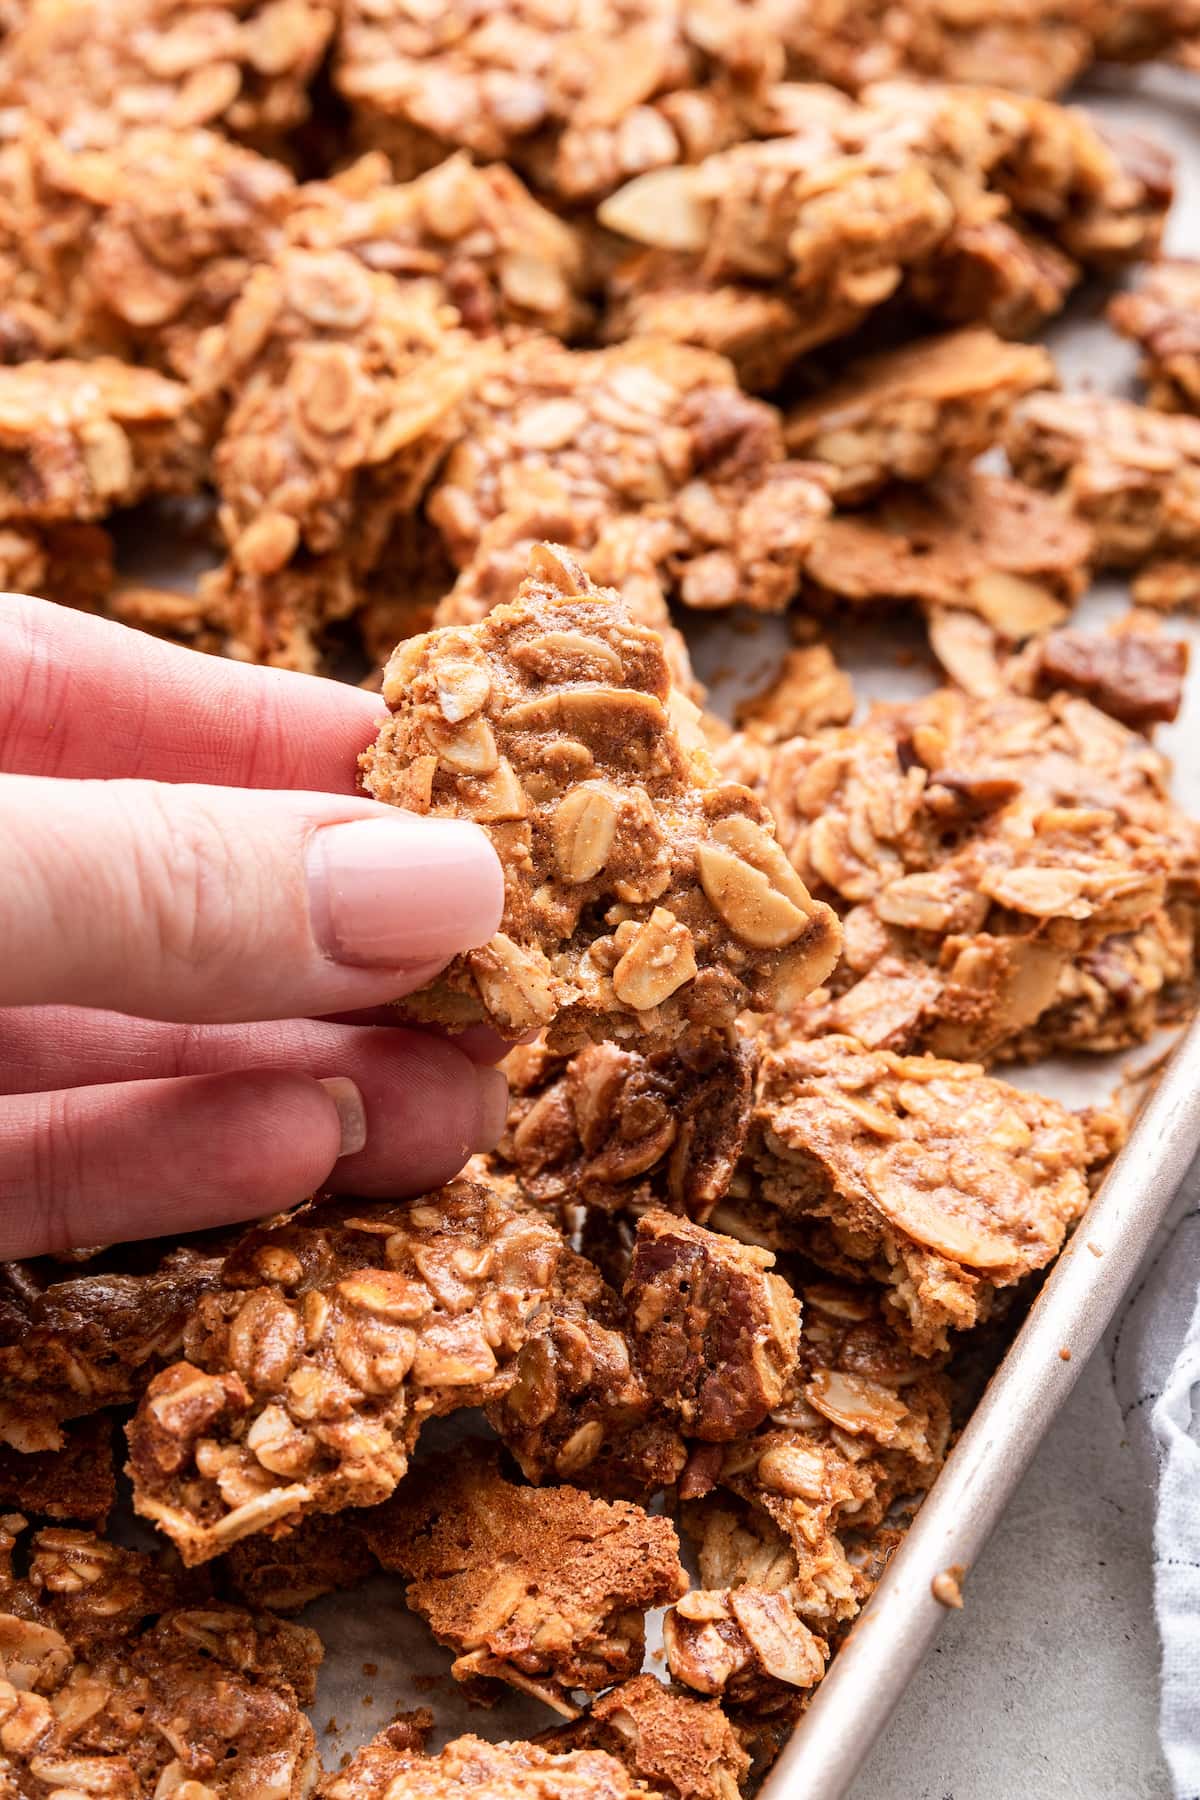 A woman's hand holds a piece of protein granola over a baking tray of the granola.